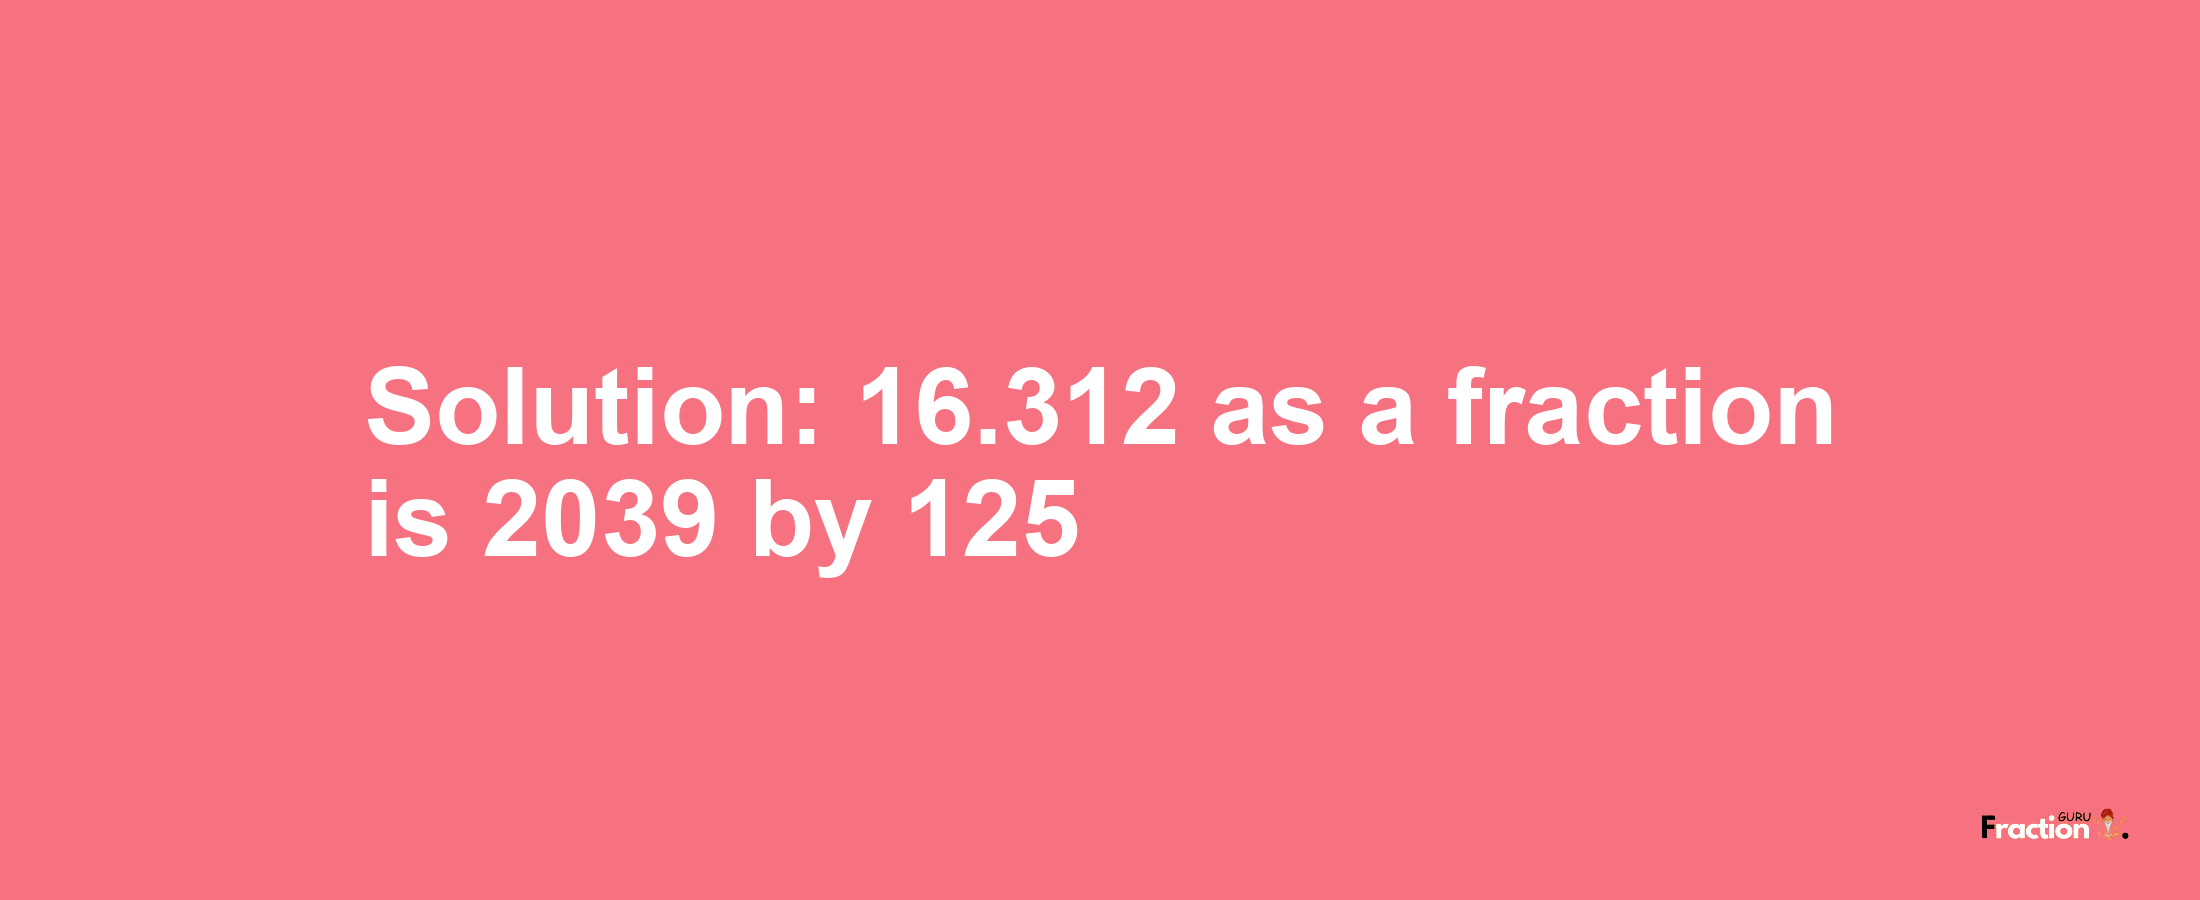 Solution:16.312 as a fraction is 2039/125